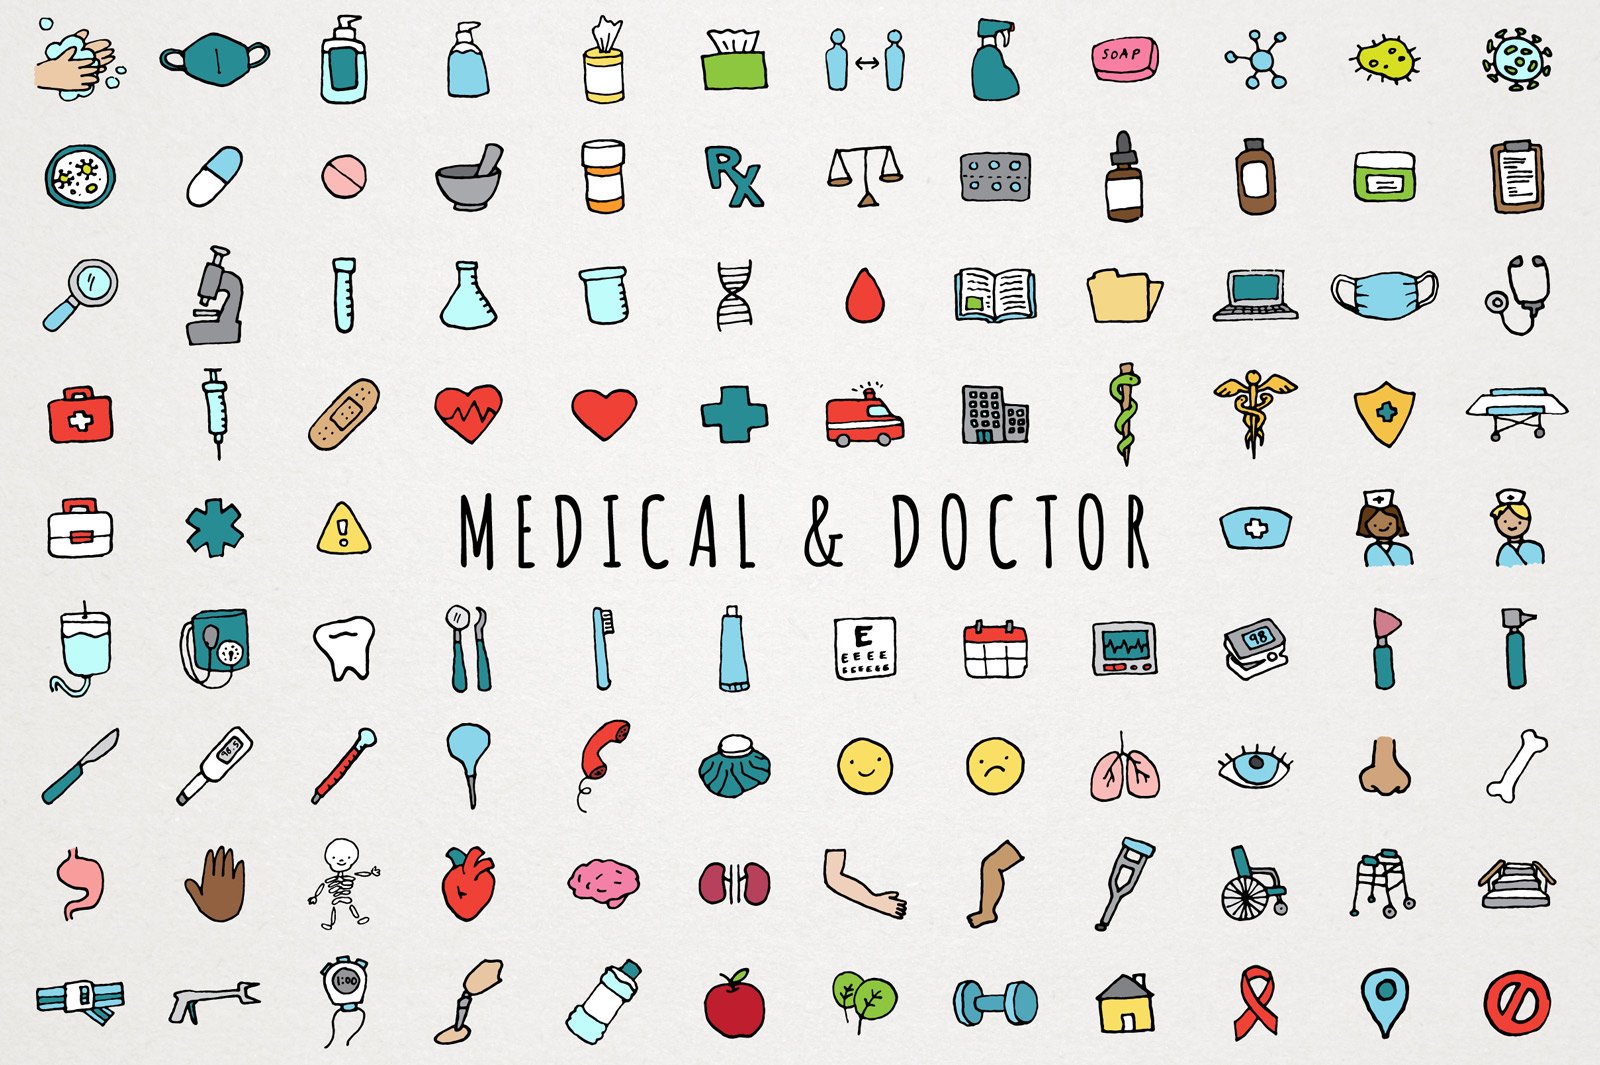 Medical & Doctor Icons Clipart Set cover image.